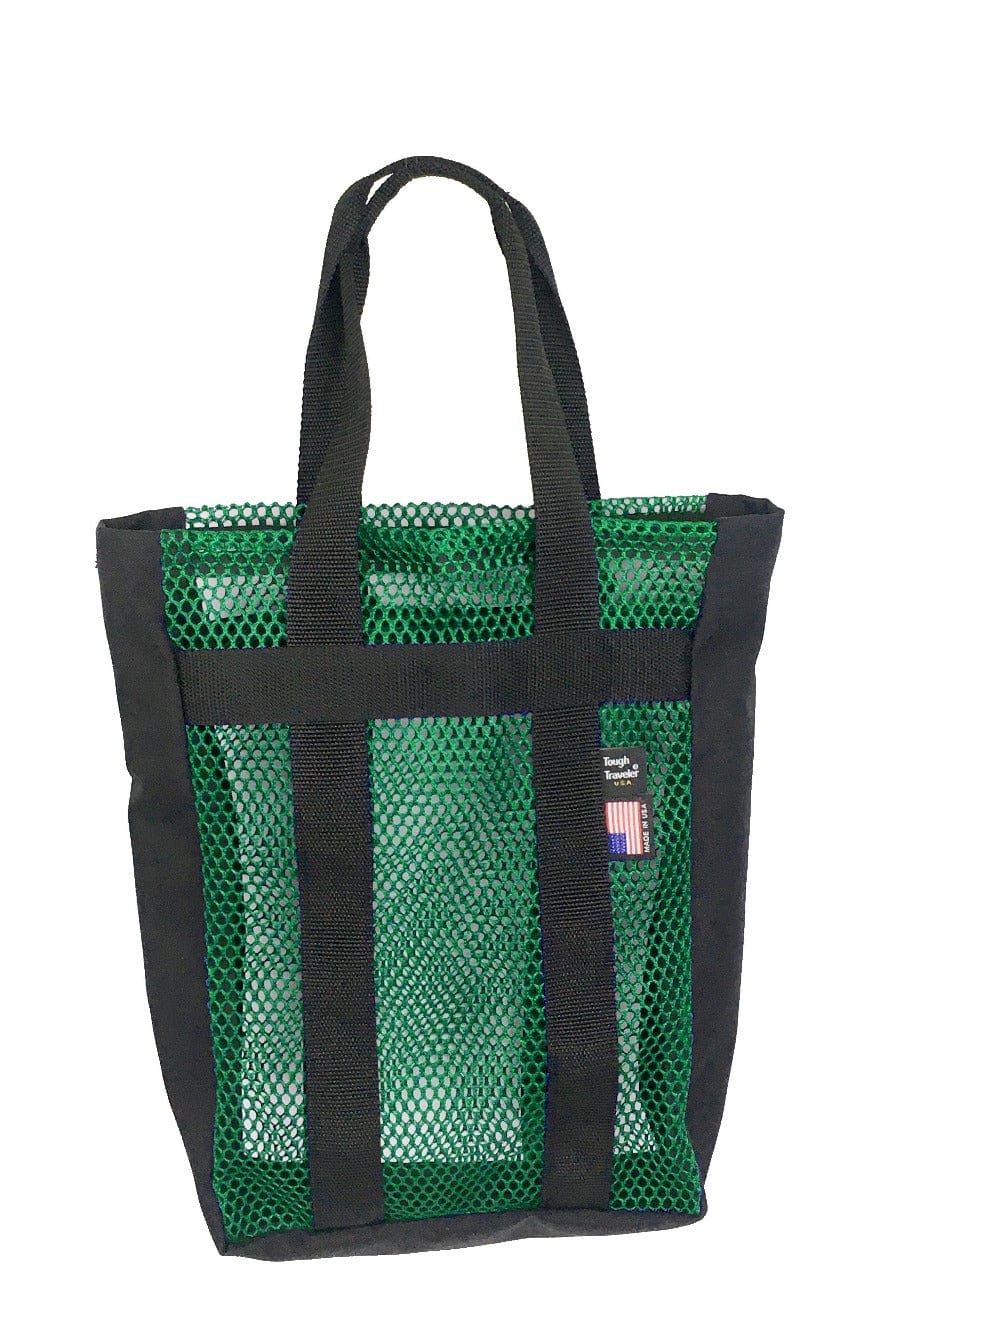 Five Star Guitars Canvas Tote Bag - Army Green